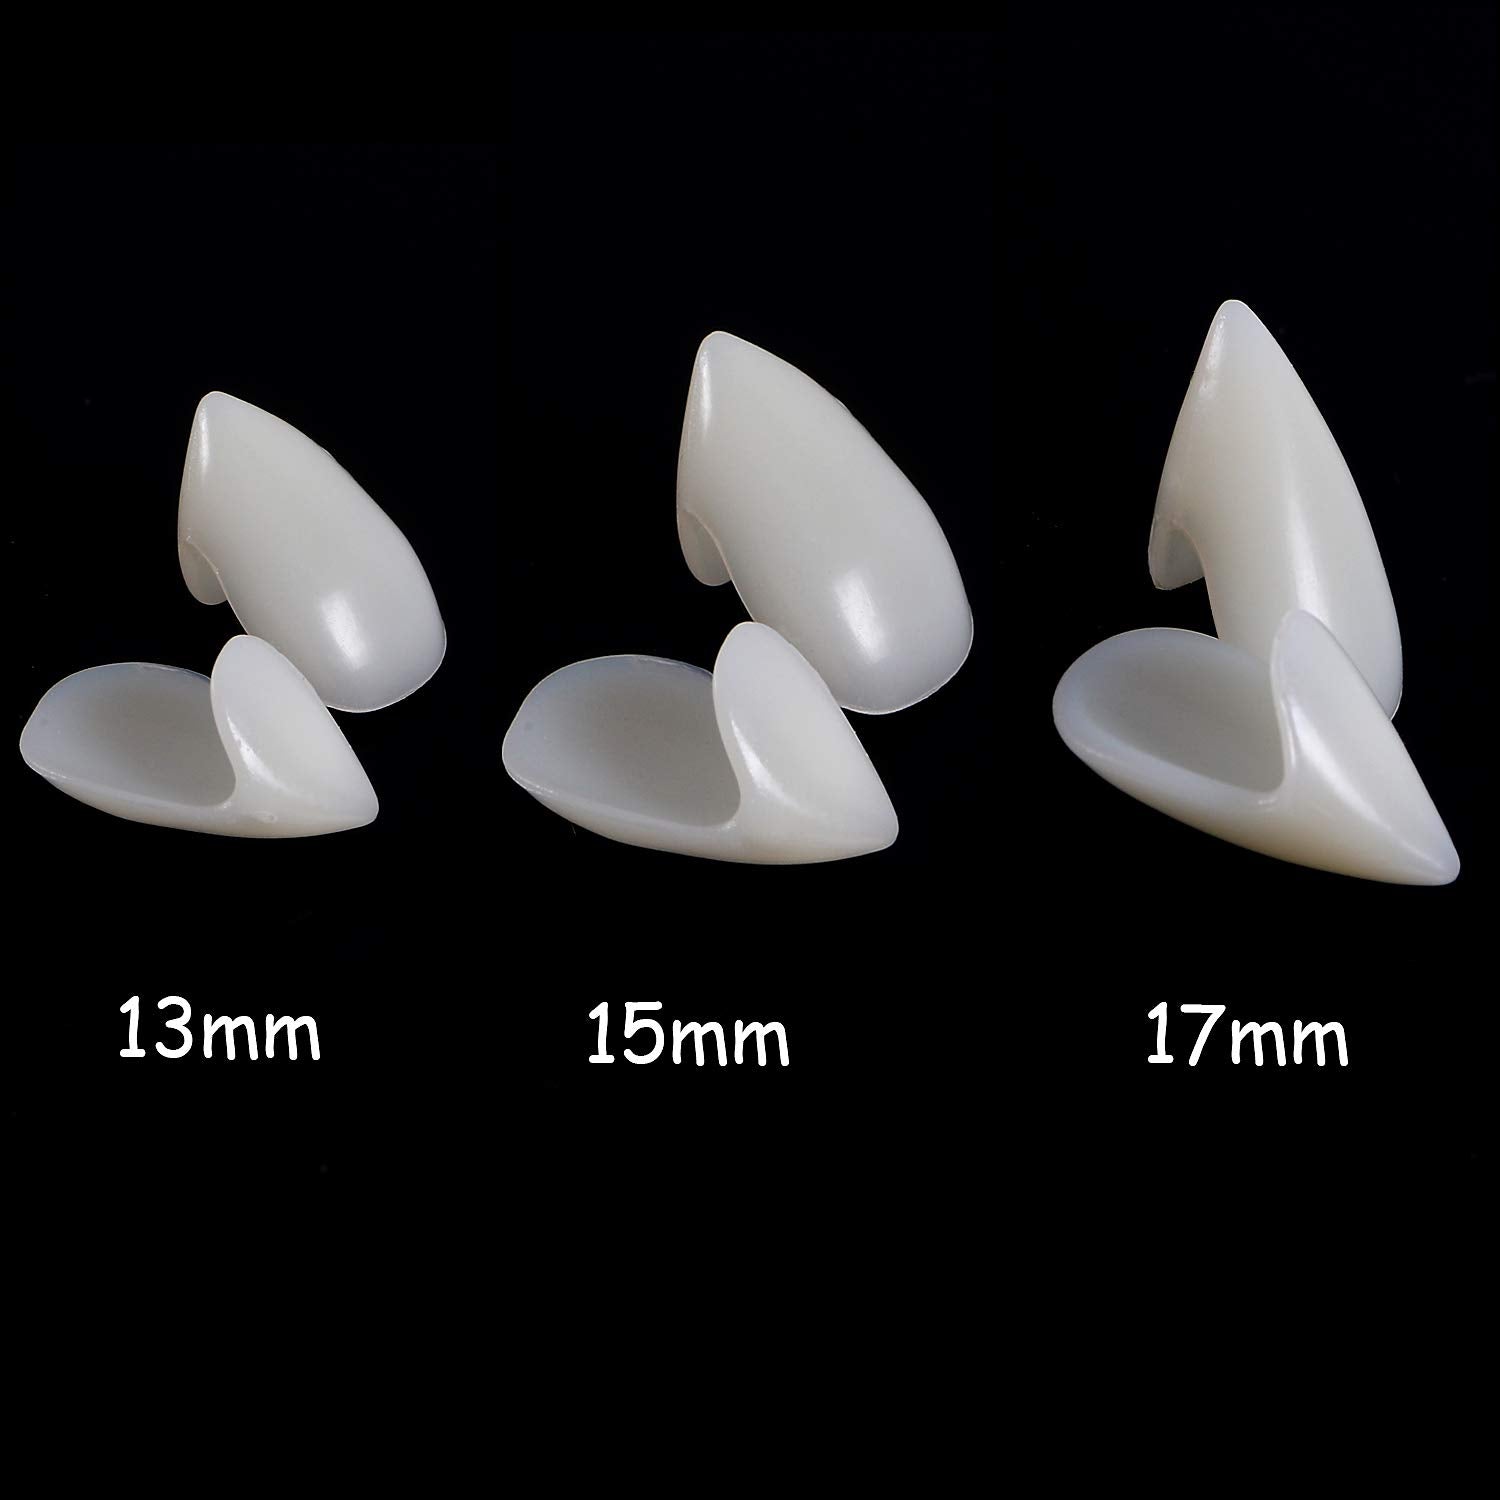 HLenyoy Vampire Teeth Fangs Elf Ears for Cosplay Costume Accessory Halloween Party Favors